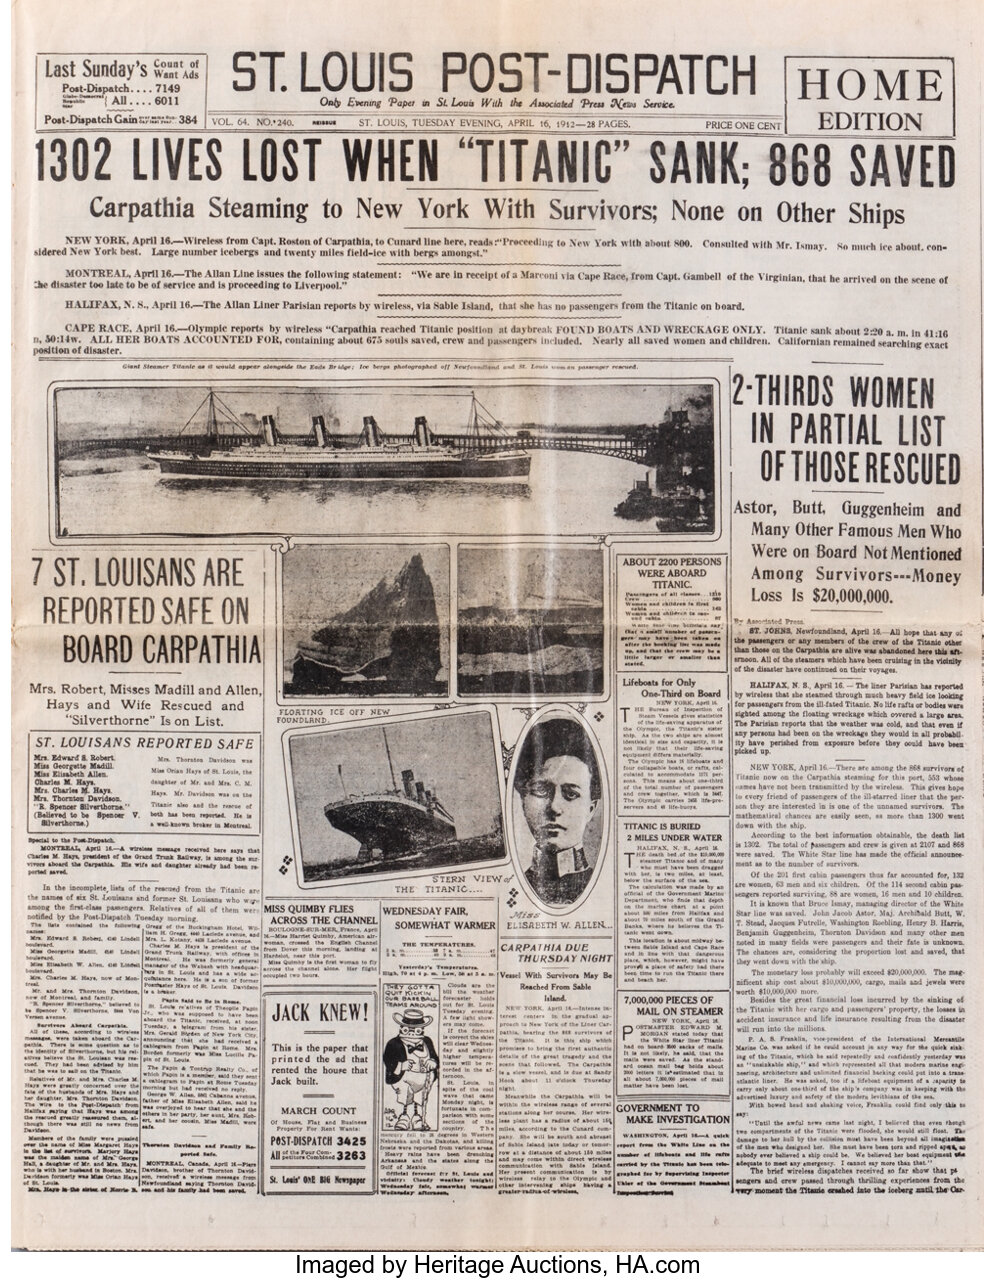 Debbie Reynolds personal Titanic sinking reprinted St. Louis | Lot #1340 |  Heritage Auctions